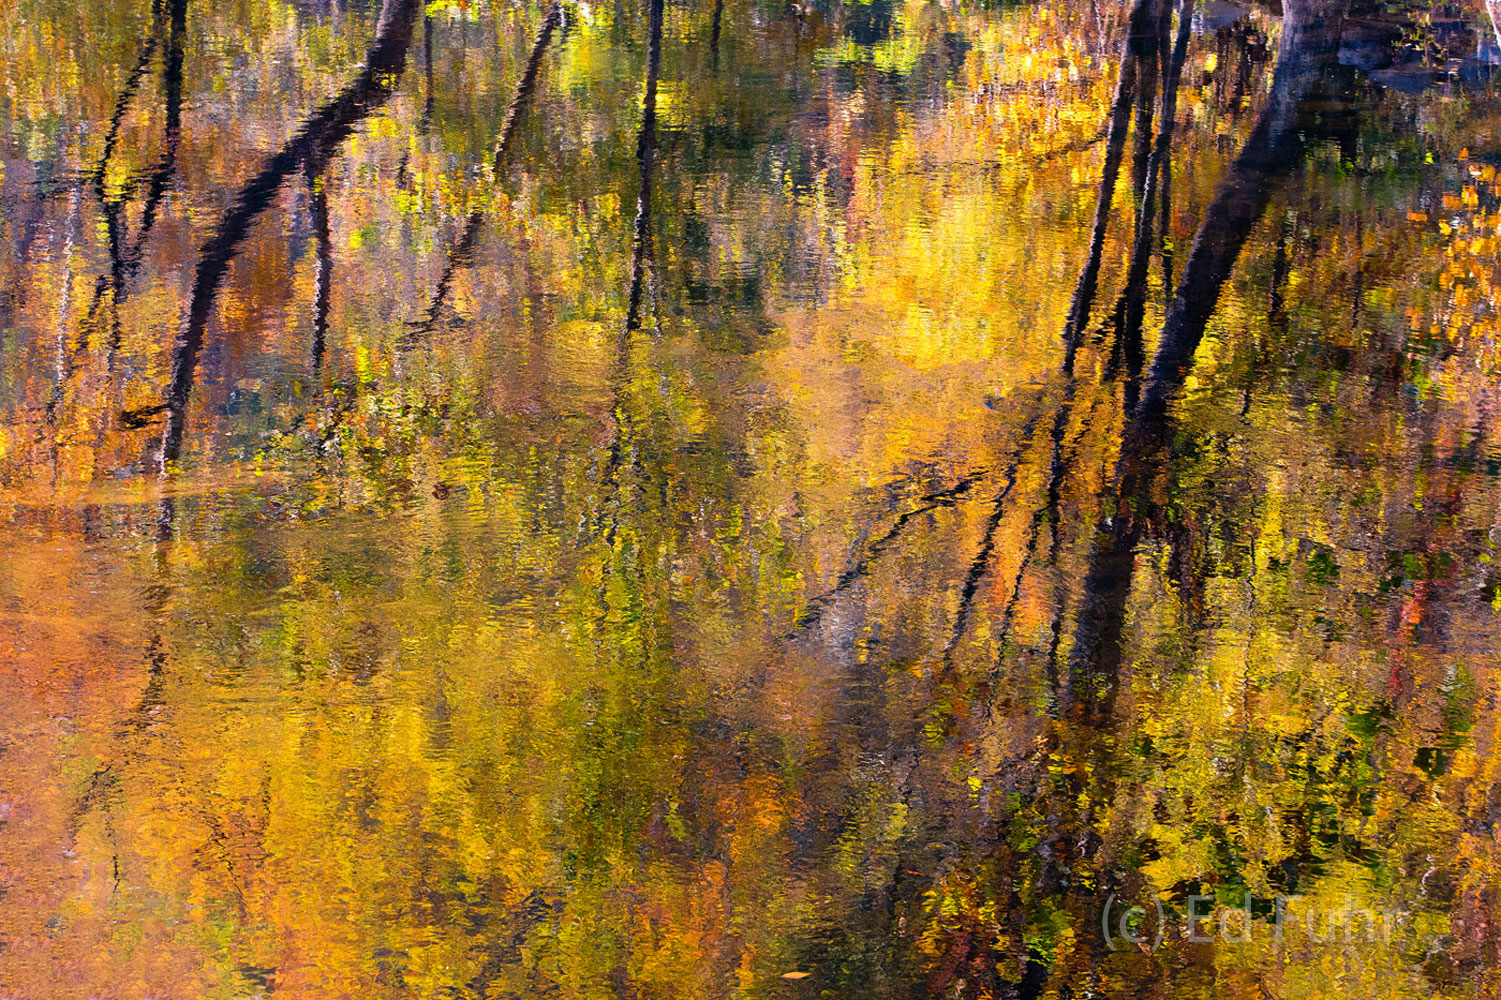 A colorful autumn canopy reflects in a pool of still water on the Little River.